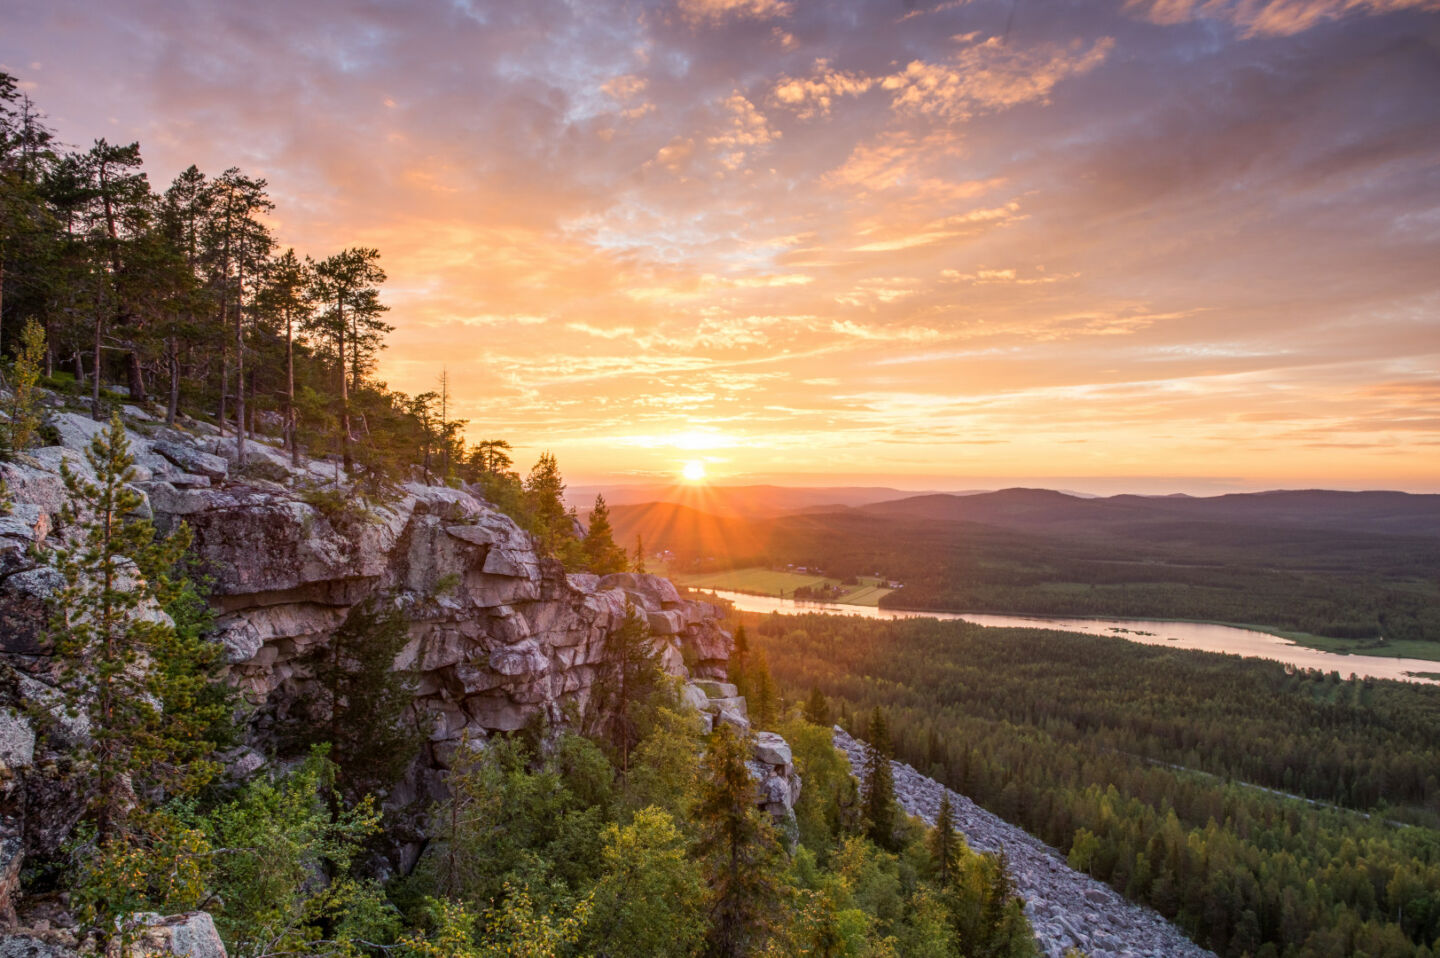 Sunset at Mt. Aavasaksa, a filming location in Finnish Lapland